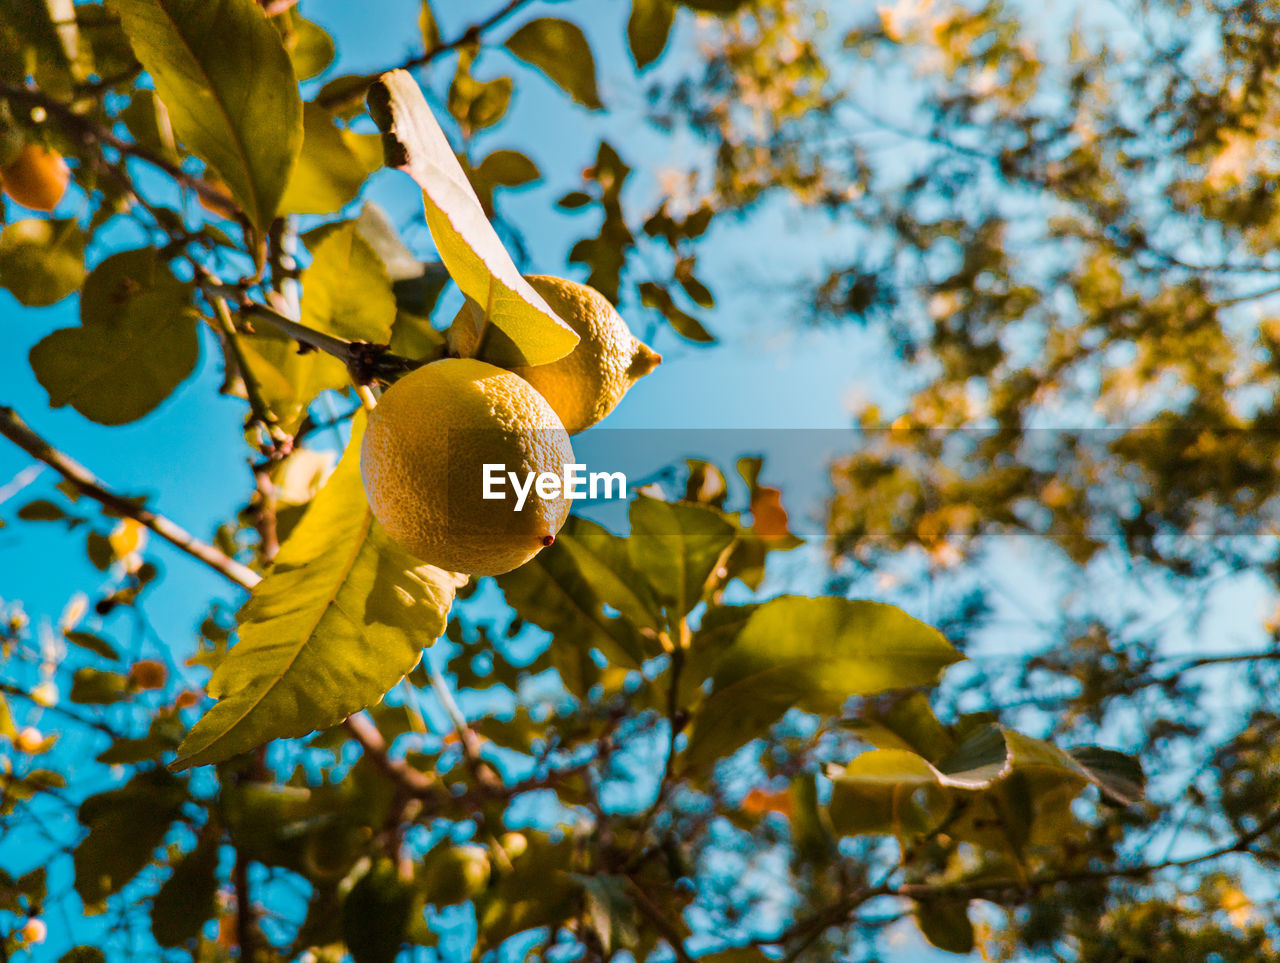 A lemon tree with leaves and a blue sky in the background